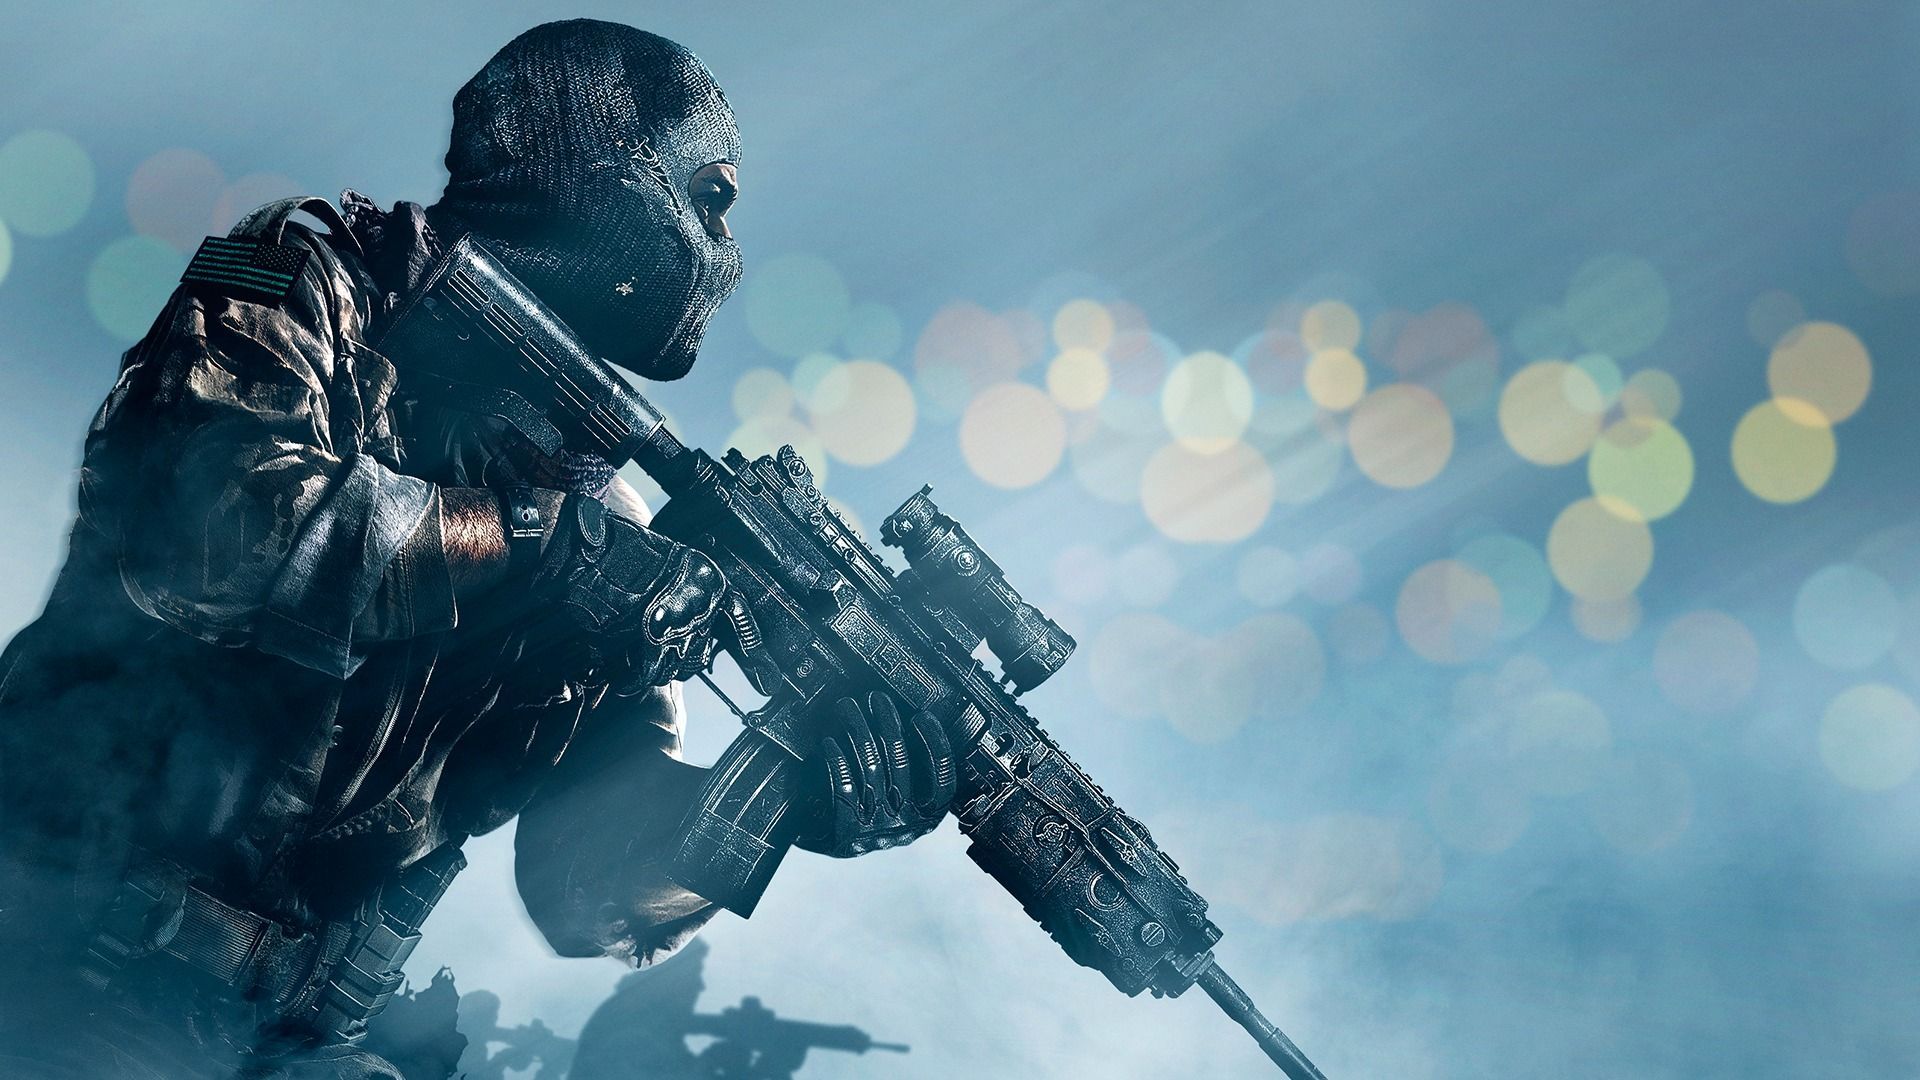 Download Wallpaper 1920x1080 Call of duty ghosts, Activision ...